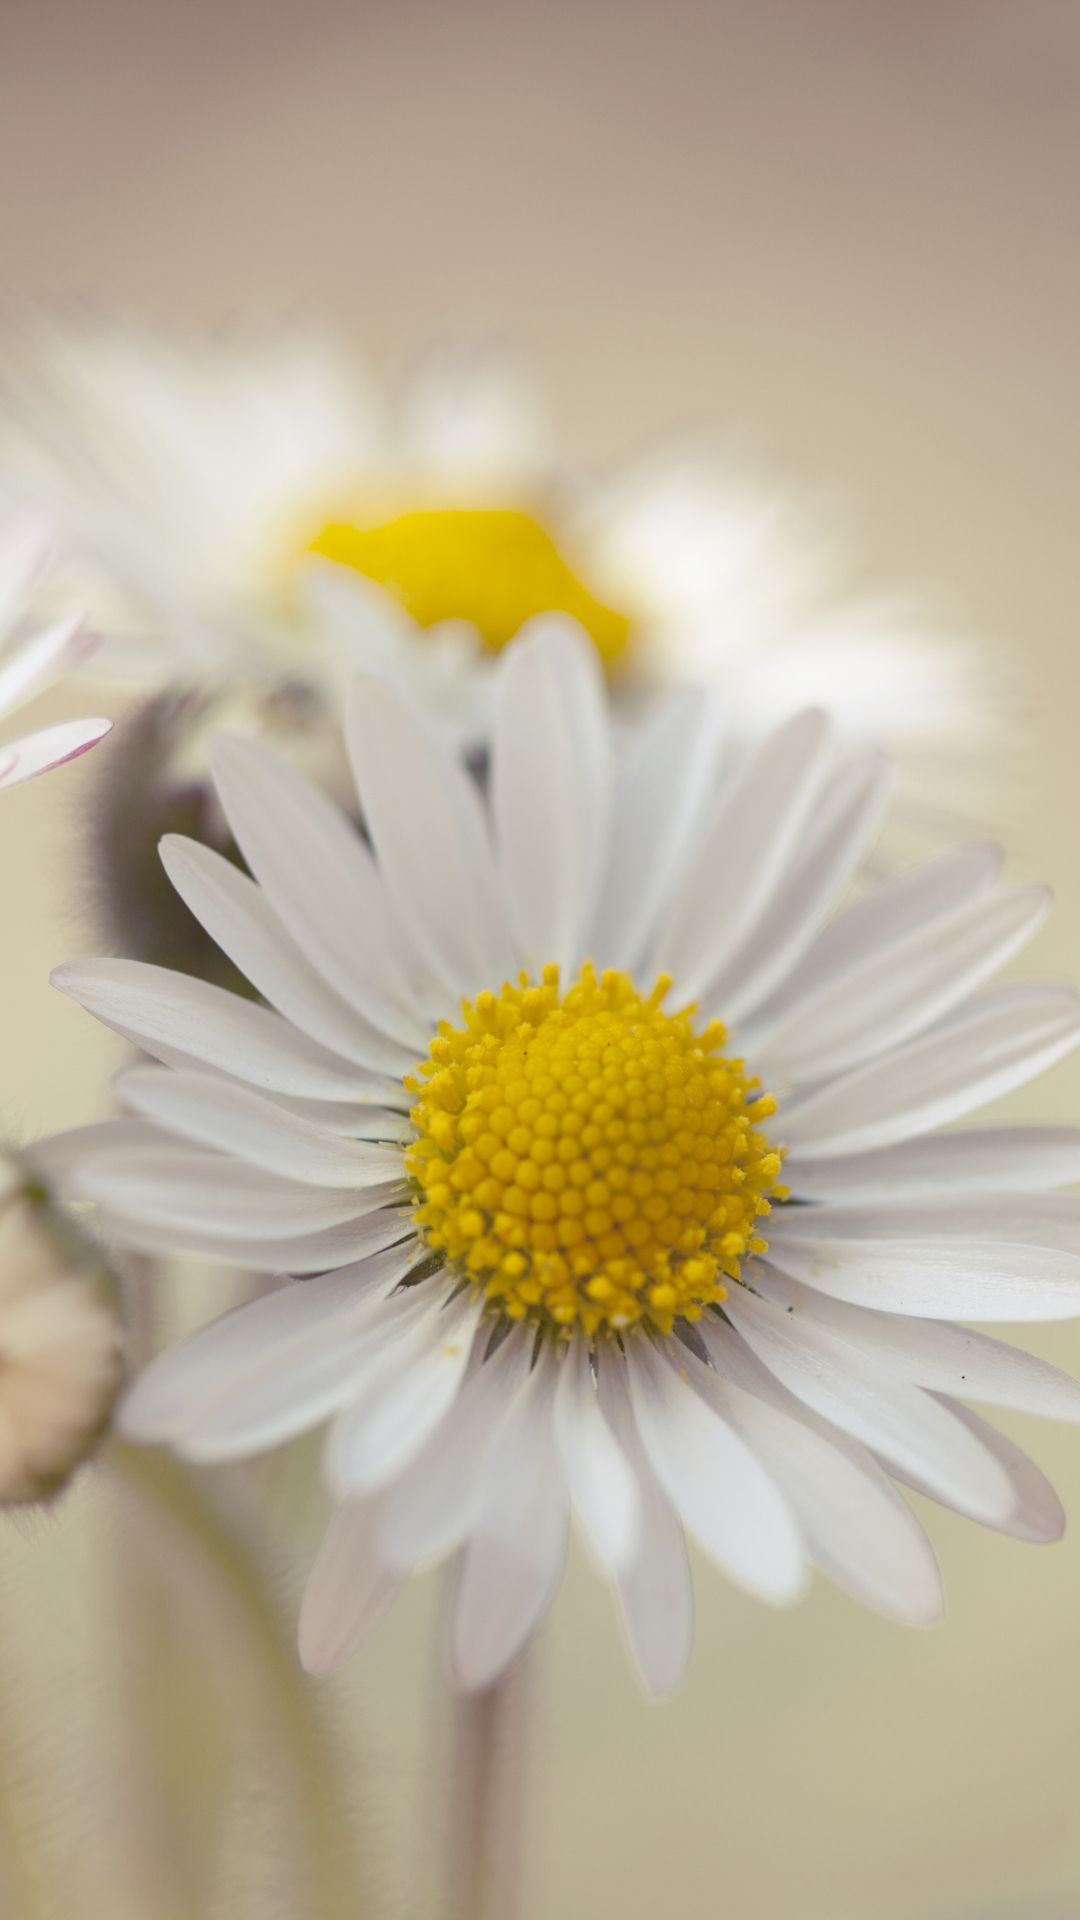 A white daisy with a yellow center - Daisy